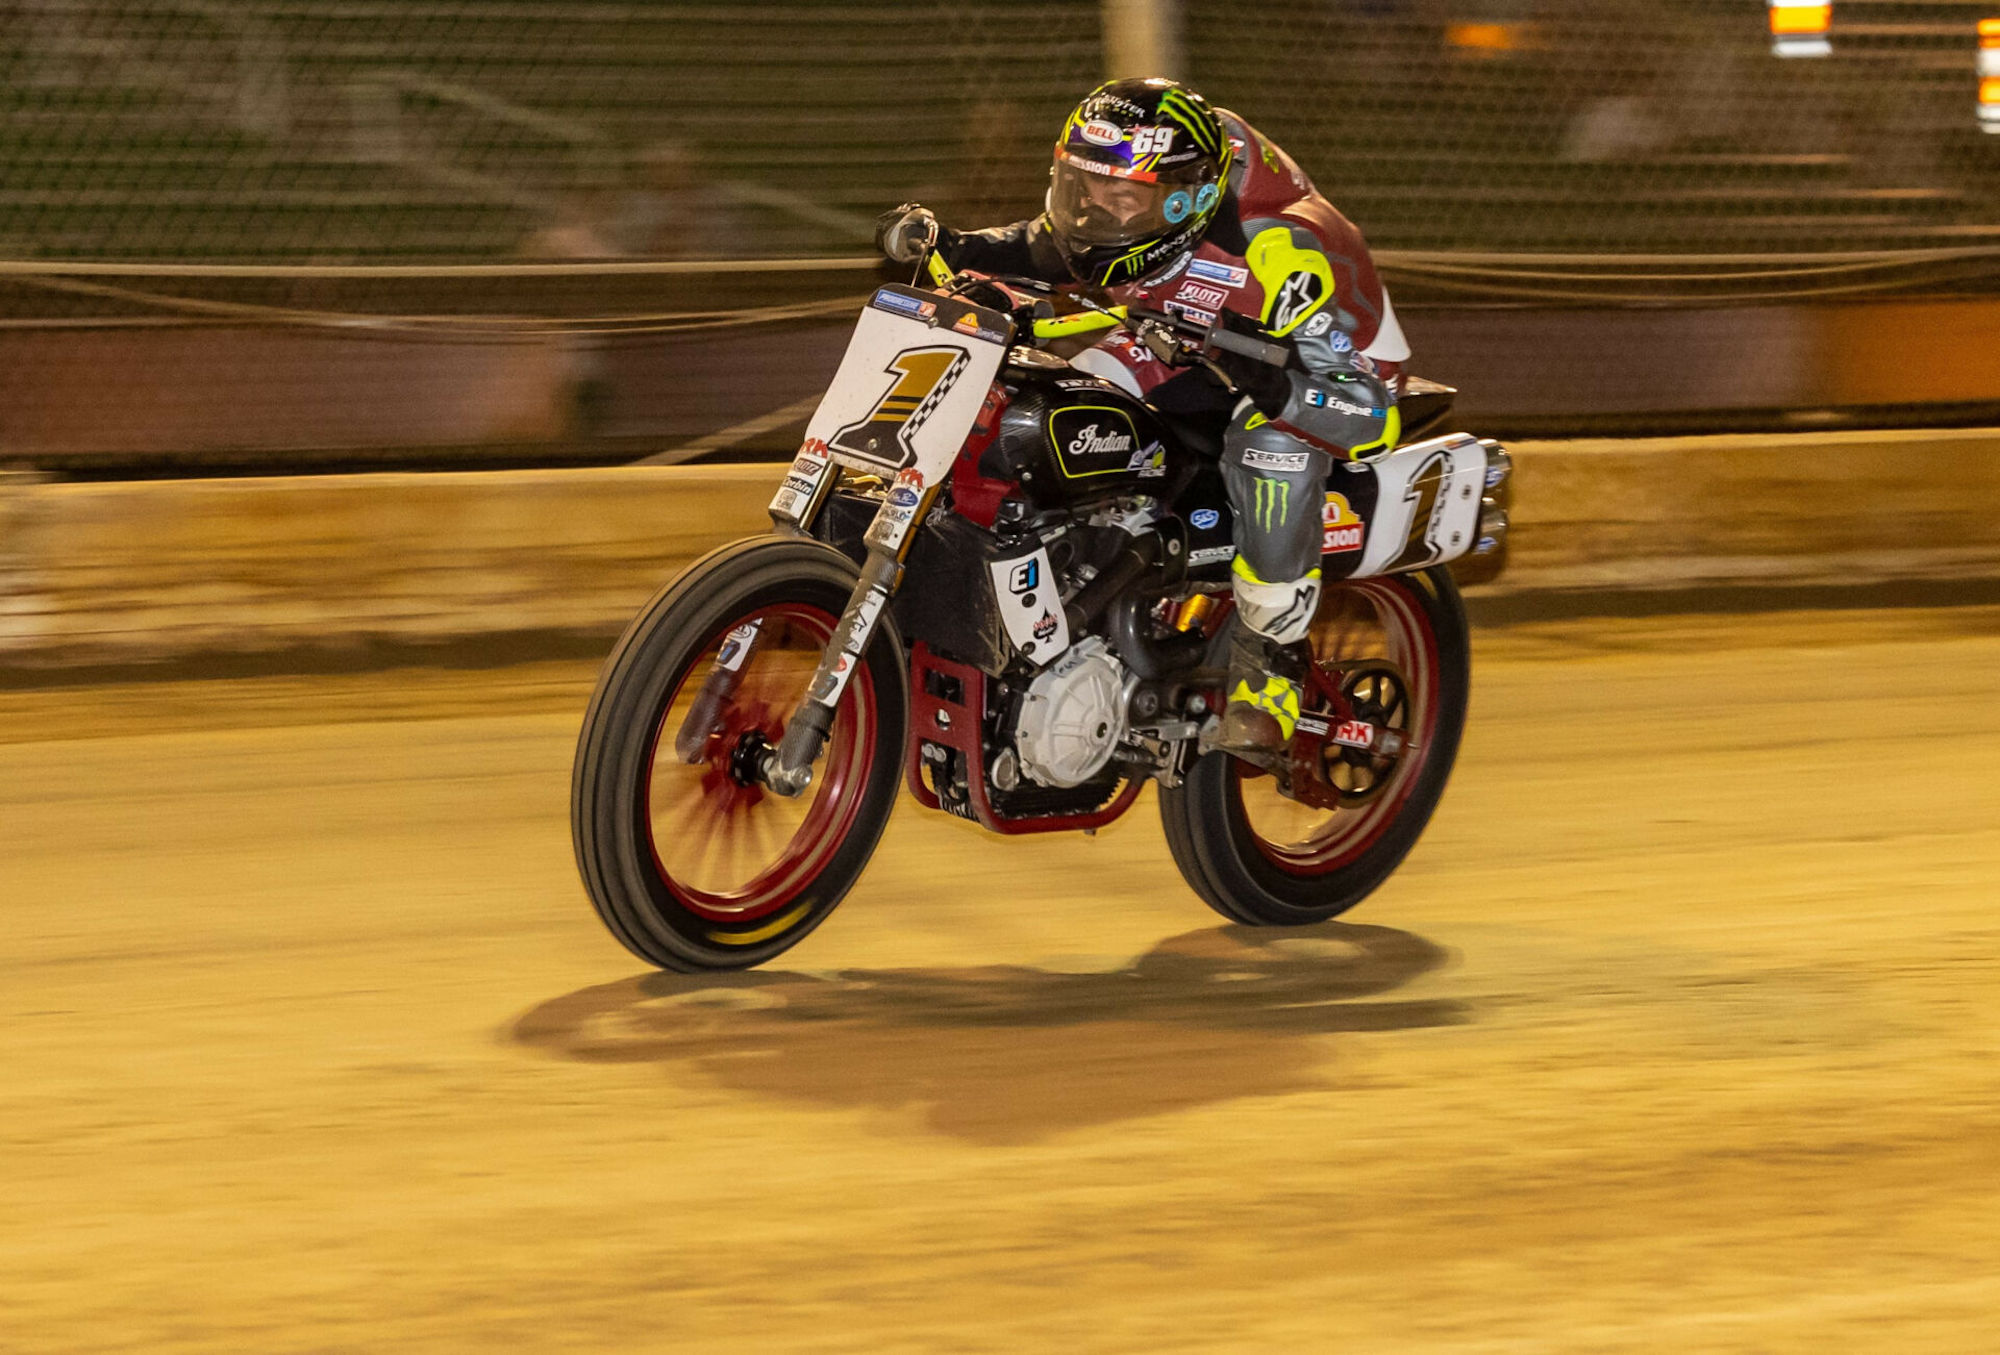 Jared Bees aboard his trusty FTR750 for Indian Motorcycle Racing. Media sourced from AFT's recent press release.